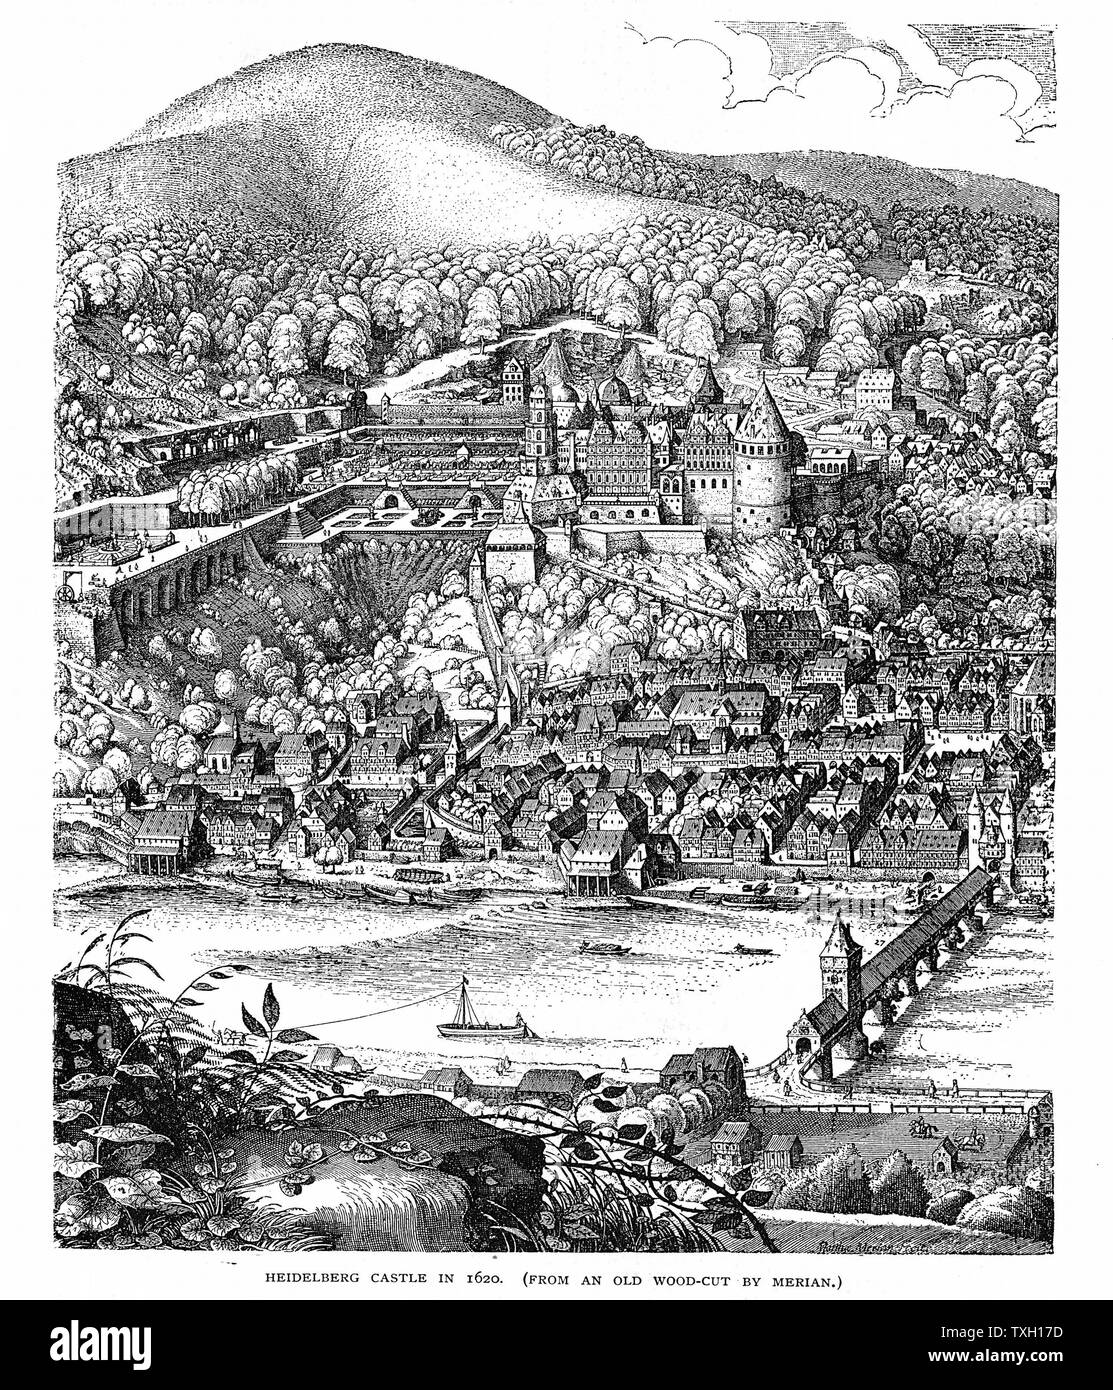 Heidelberg Castle and town viewed across the Neckar river. After 1620  woodcut. Home of Frederick V Elector Palatine and King of Bohemia (1619-20)  and Elizabeth, daughter of James I and VI of